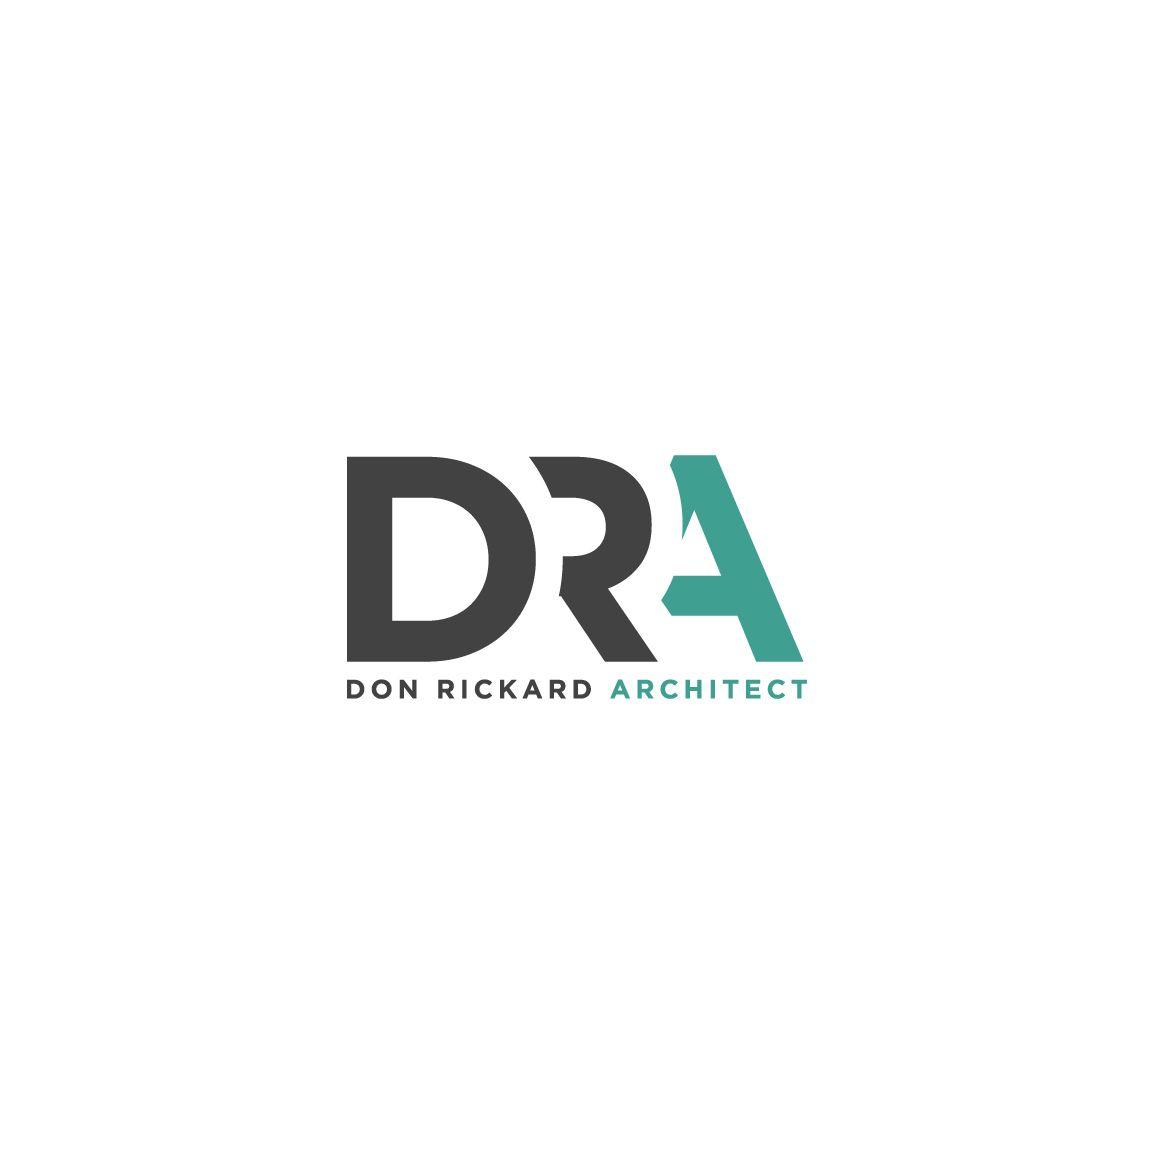 Dra Logo - Professional, Masculine, Architecture Logo Design for DRA, with